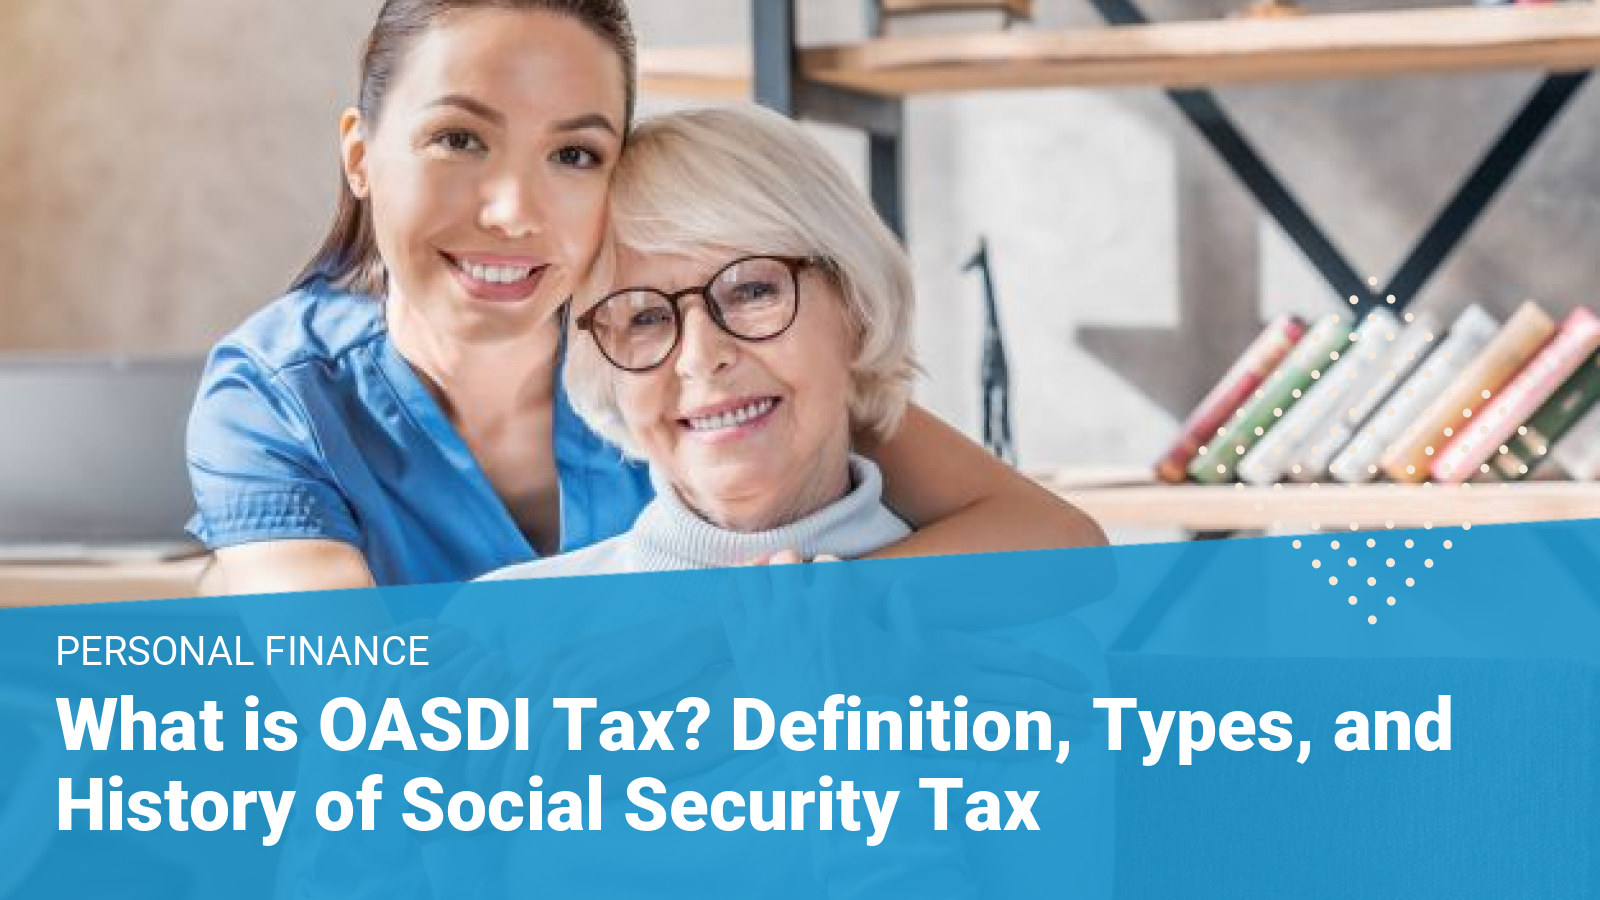 What is OASDI Tax? Definition and Types of Social Security Tax